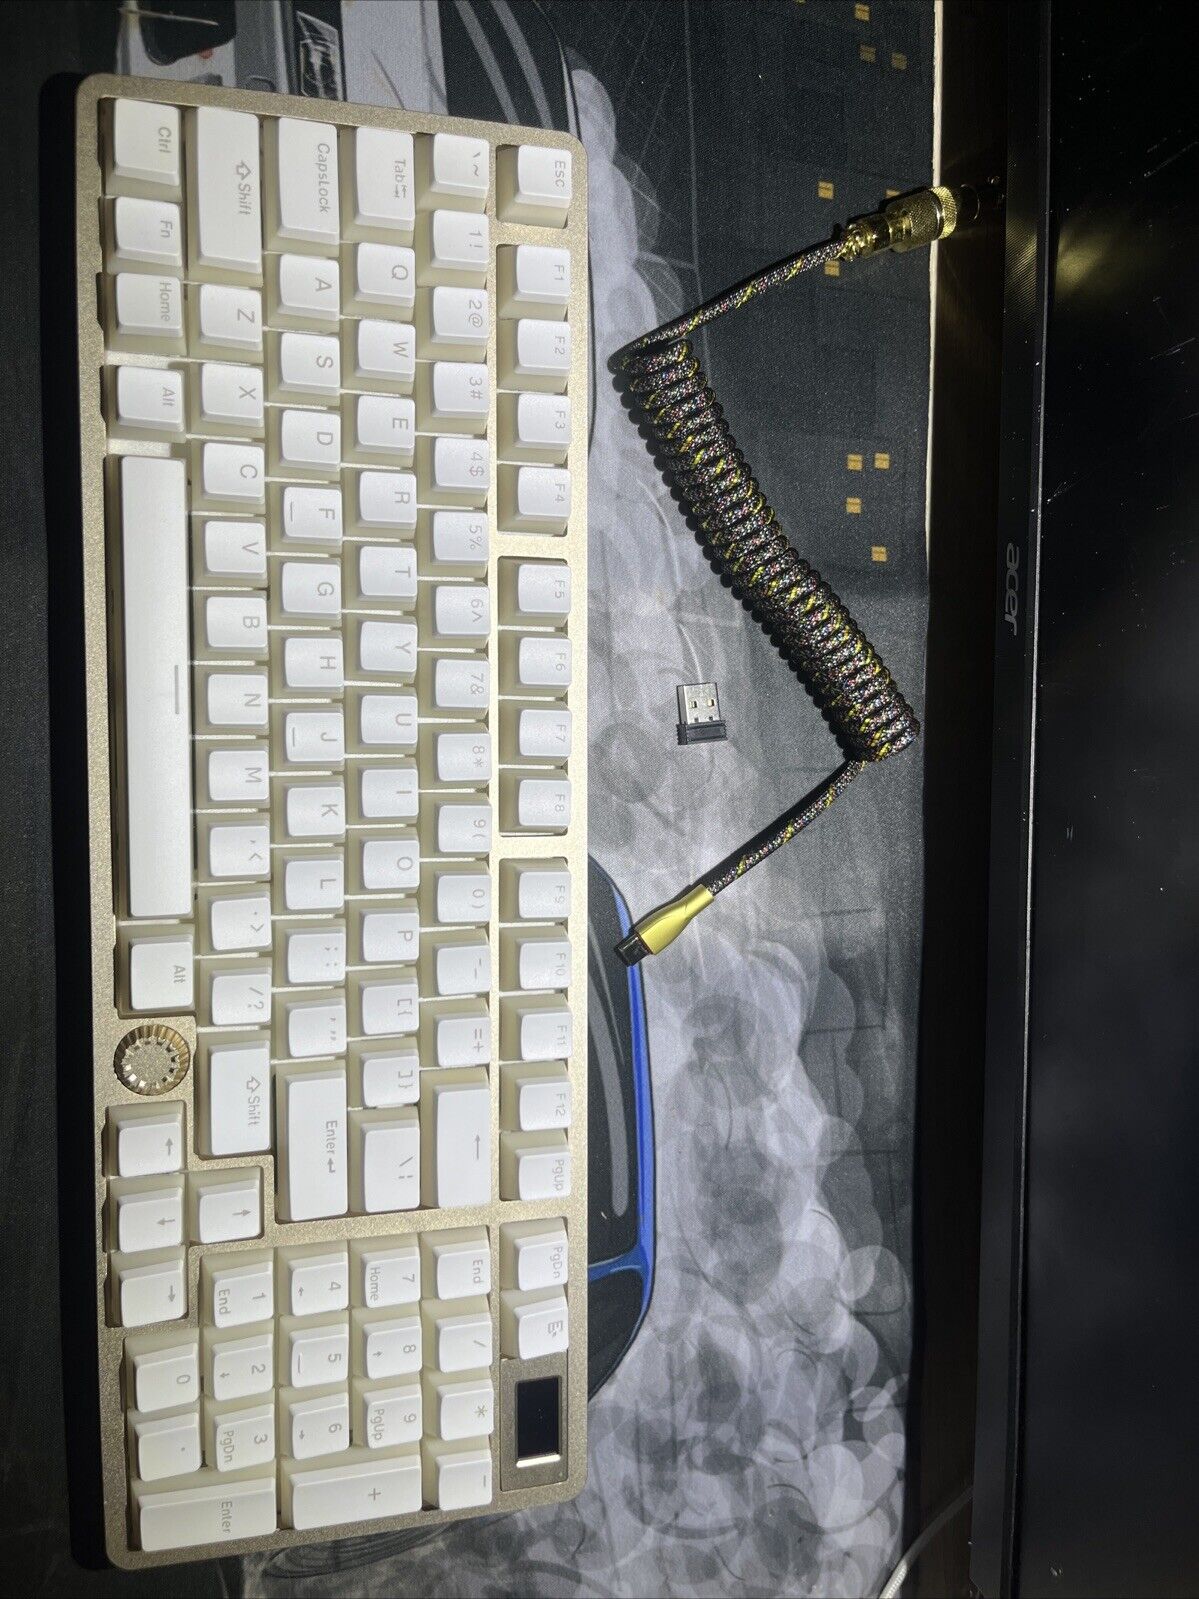 mechanical keyboard It is a completely aluminum keyboard with integrated screen